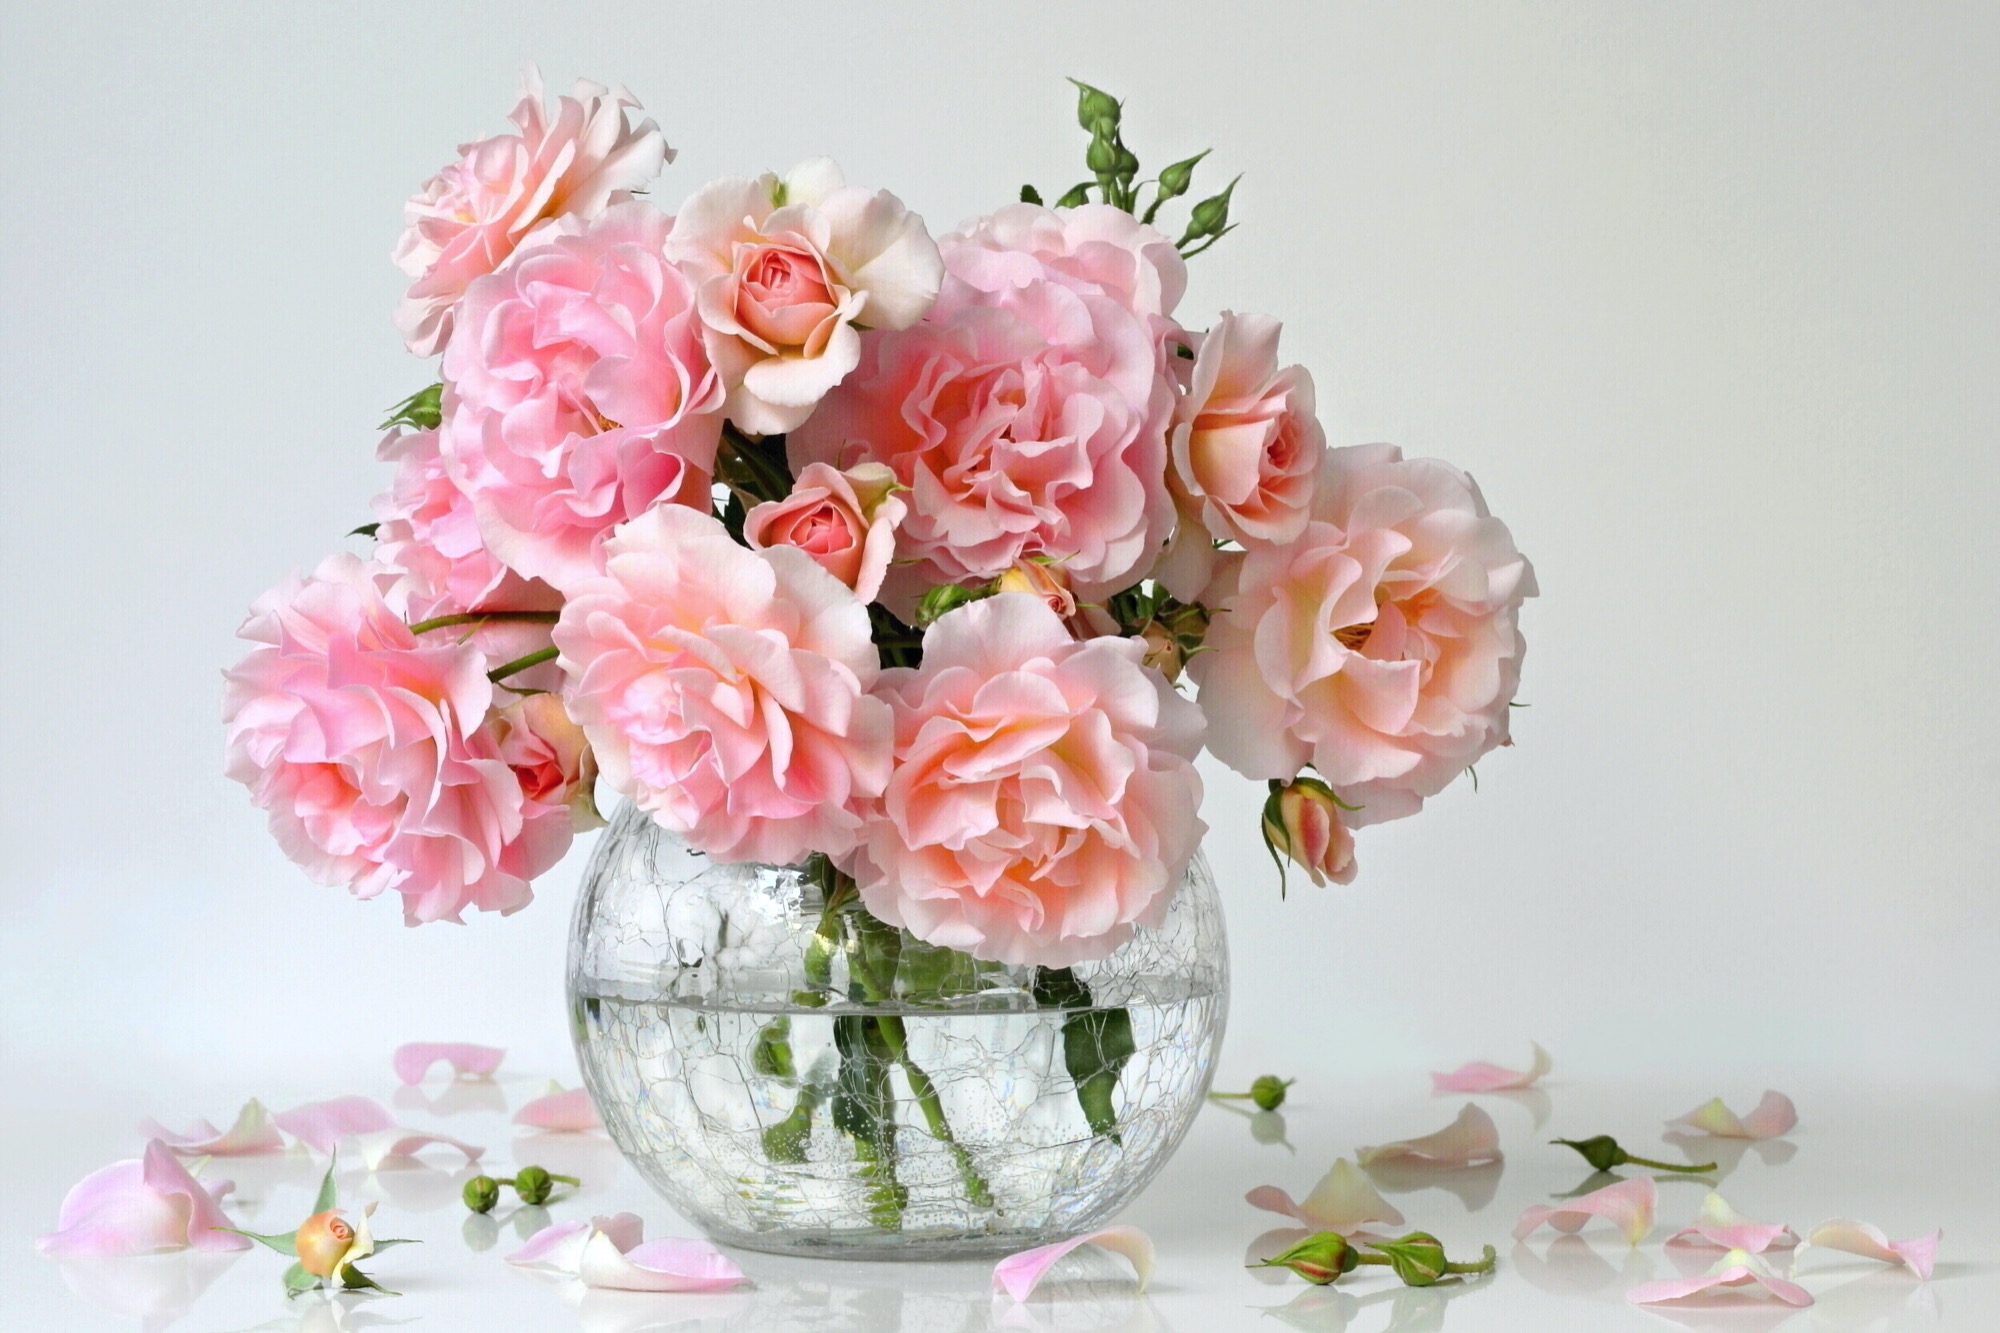 Bouquet of pink roses in a vase. Romantic floral still life with garden roses.